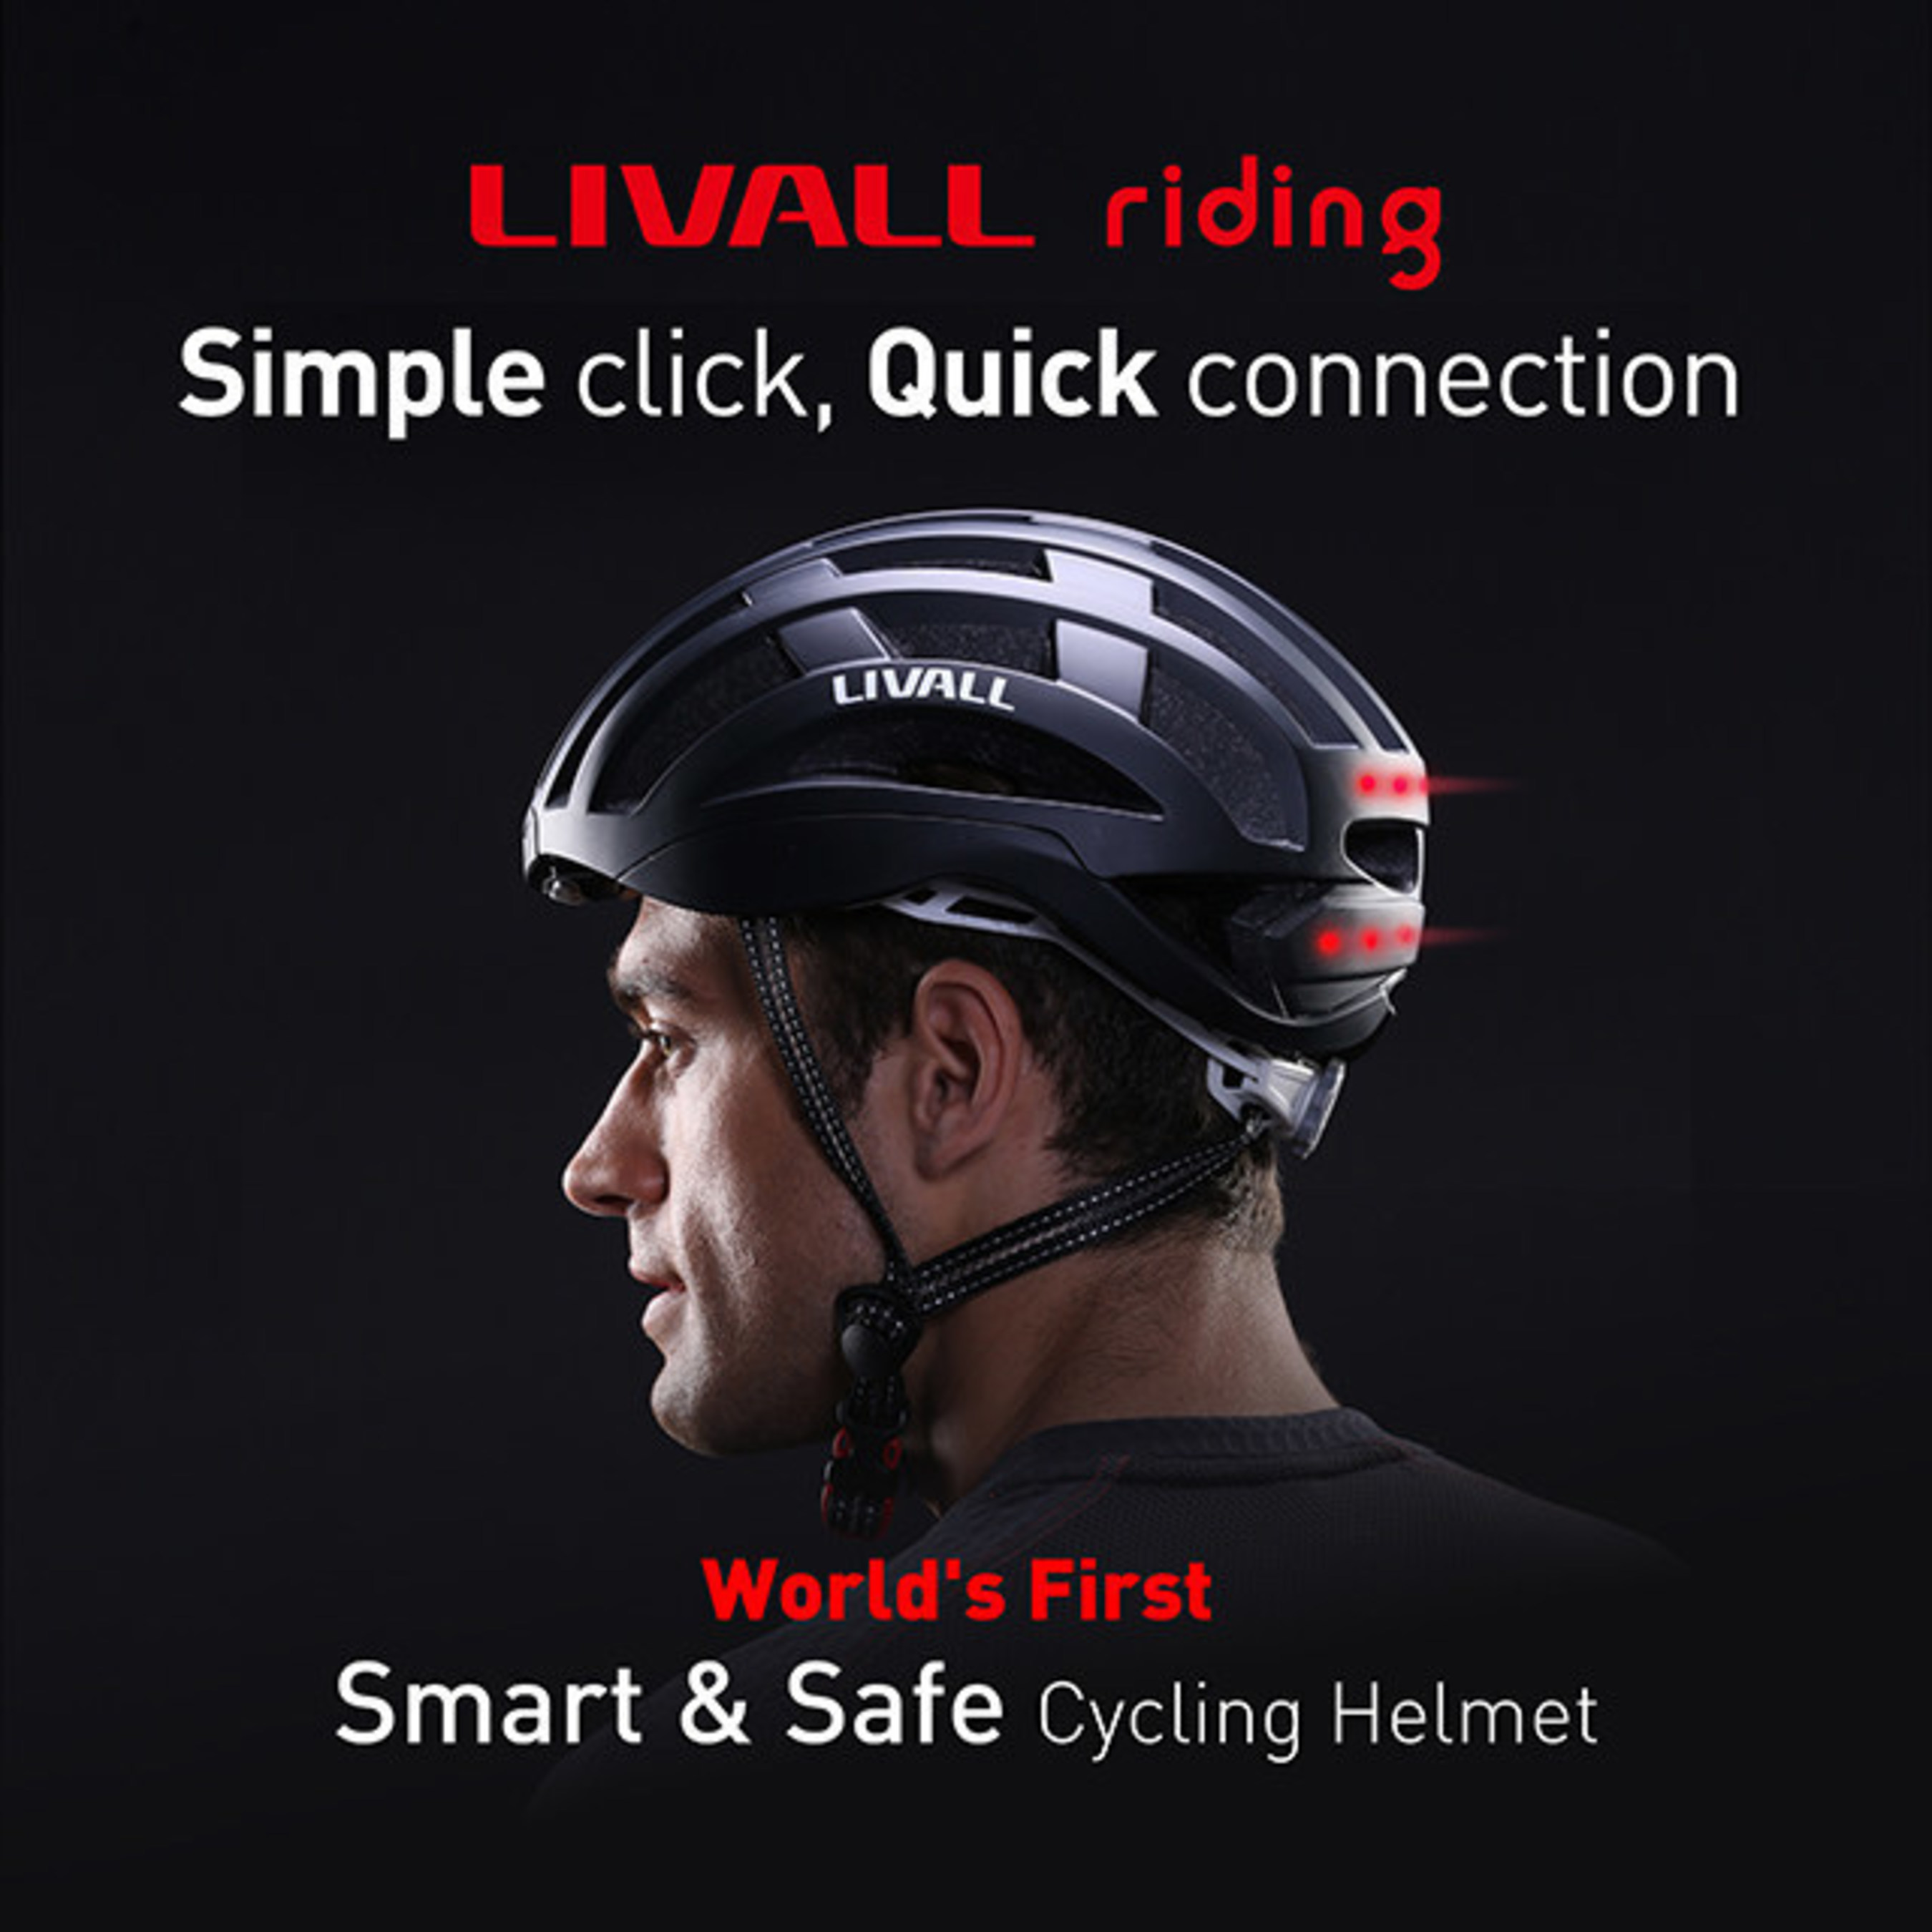 LIVALL Smart Cycling Helmet launches on Indiegogo